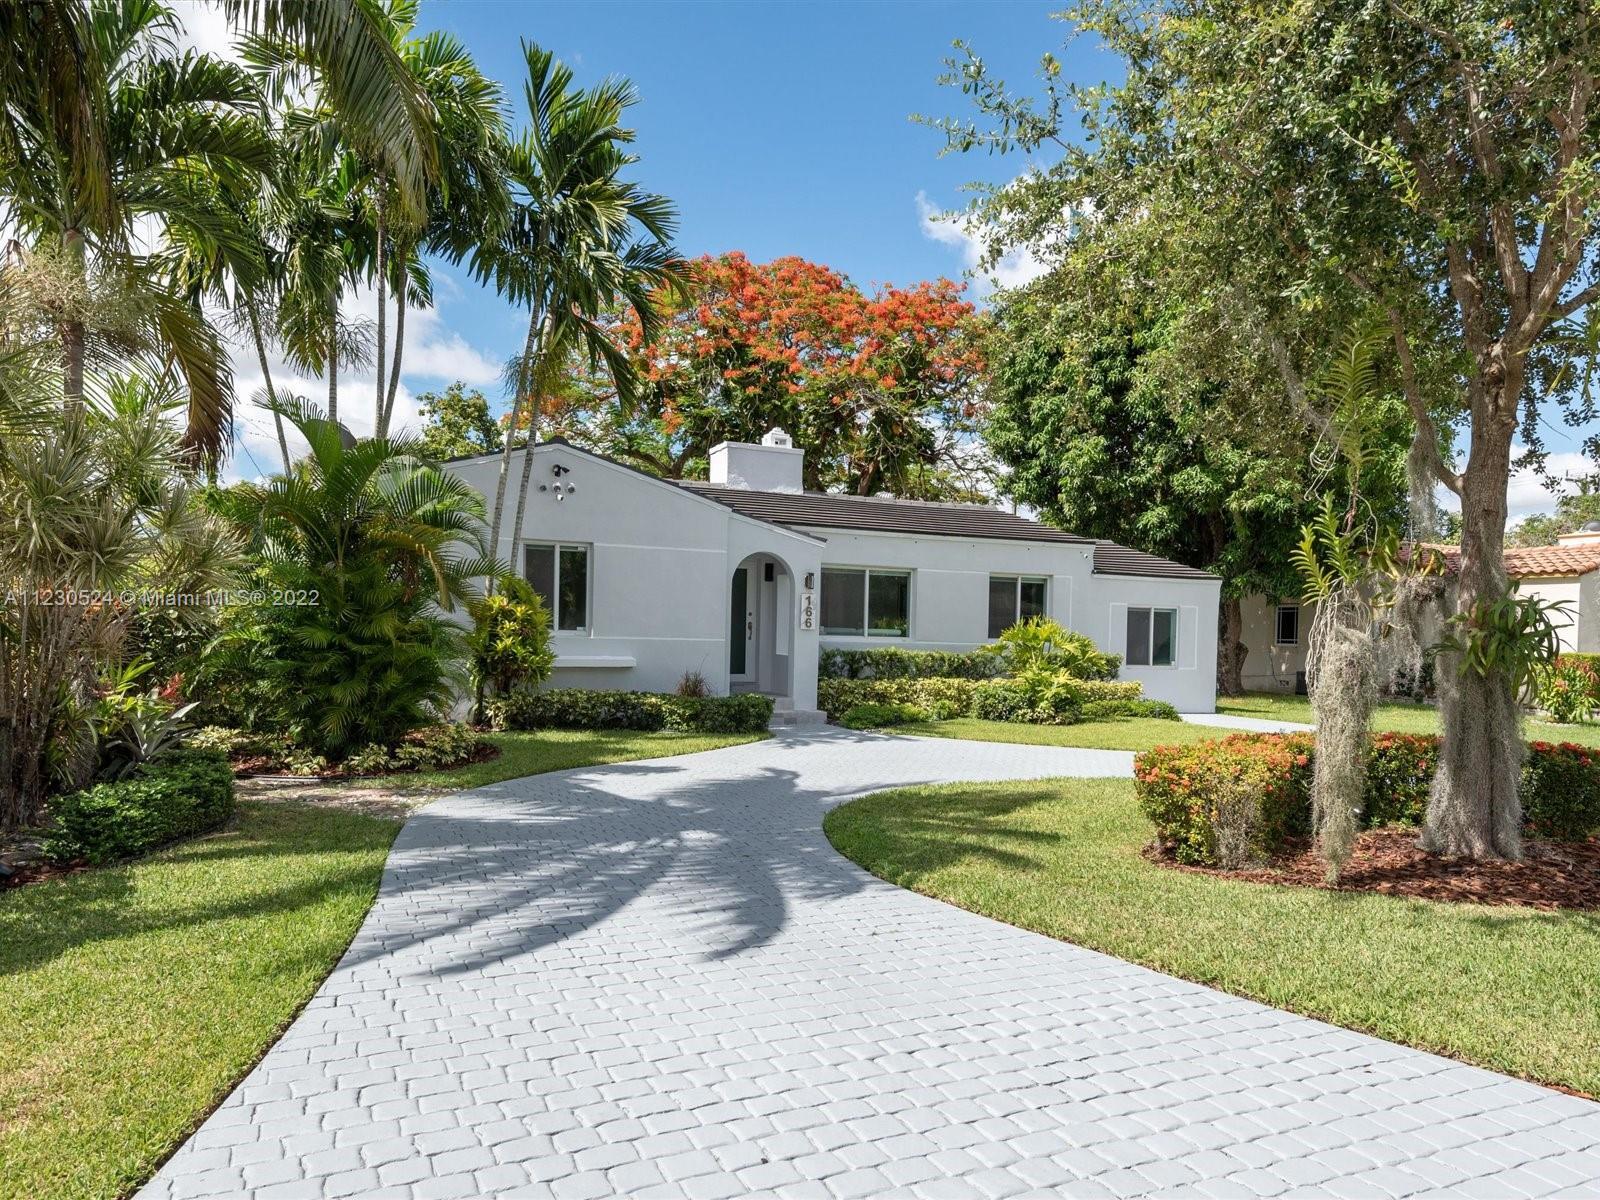 Stunning Art Deco Home in Miami Shores! This 2 bed/1 bath w/1347 SqFt has been completly updated. In